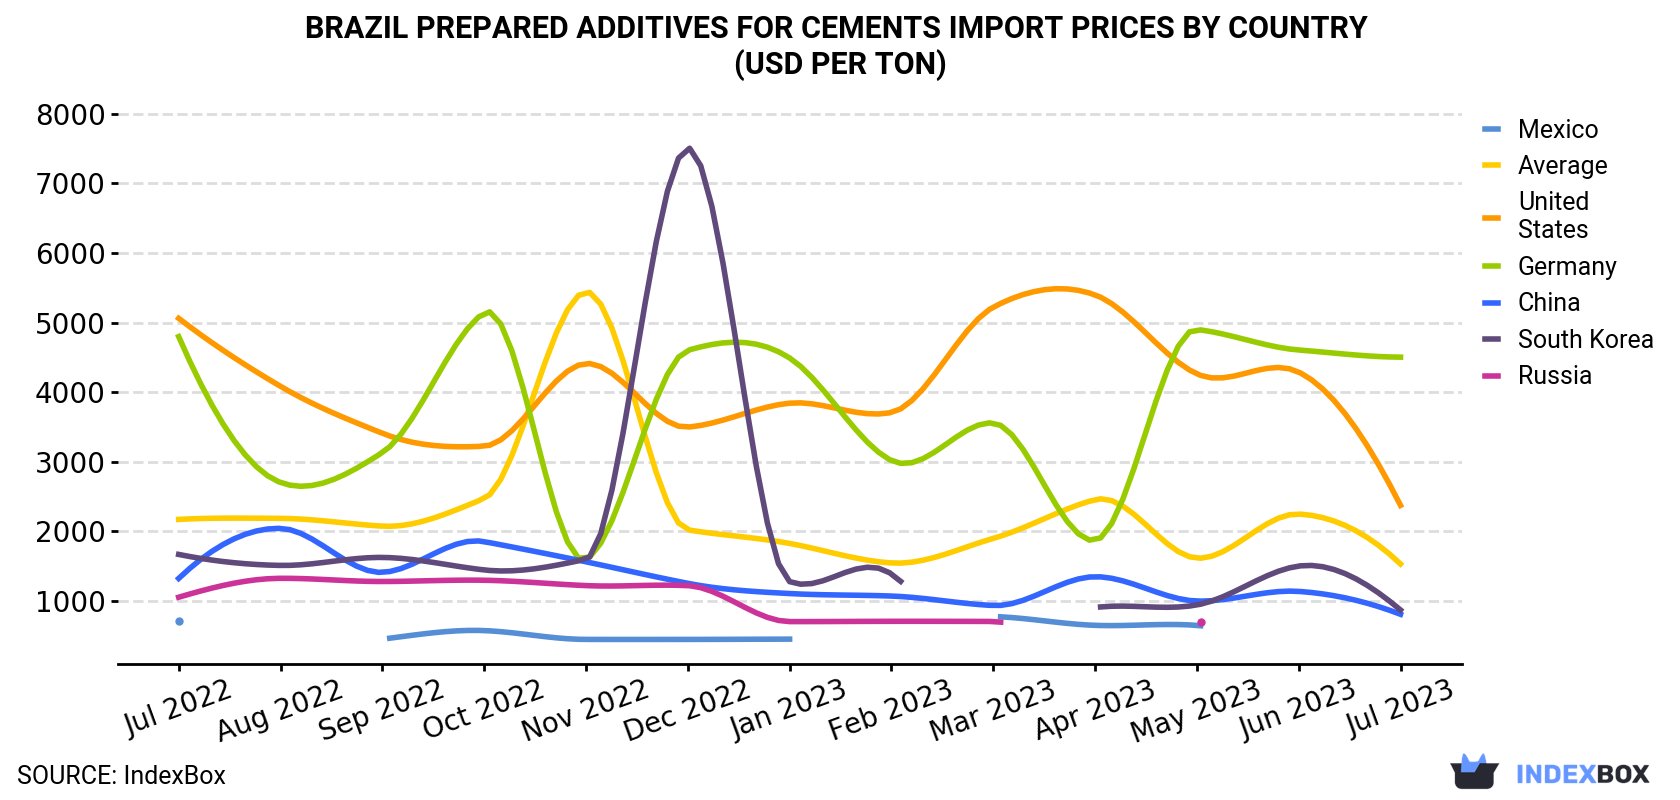 Brazil Prepared Additives For Cements Import Prices By Country (USD Per Ton)